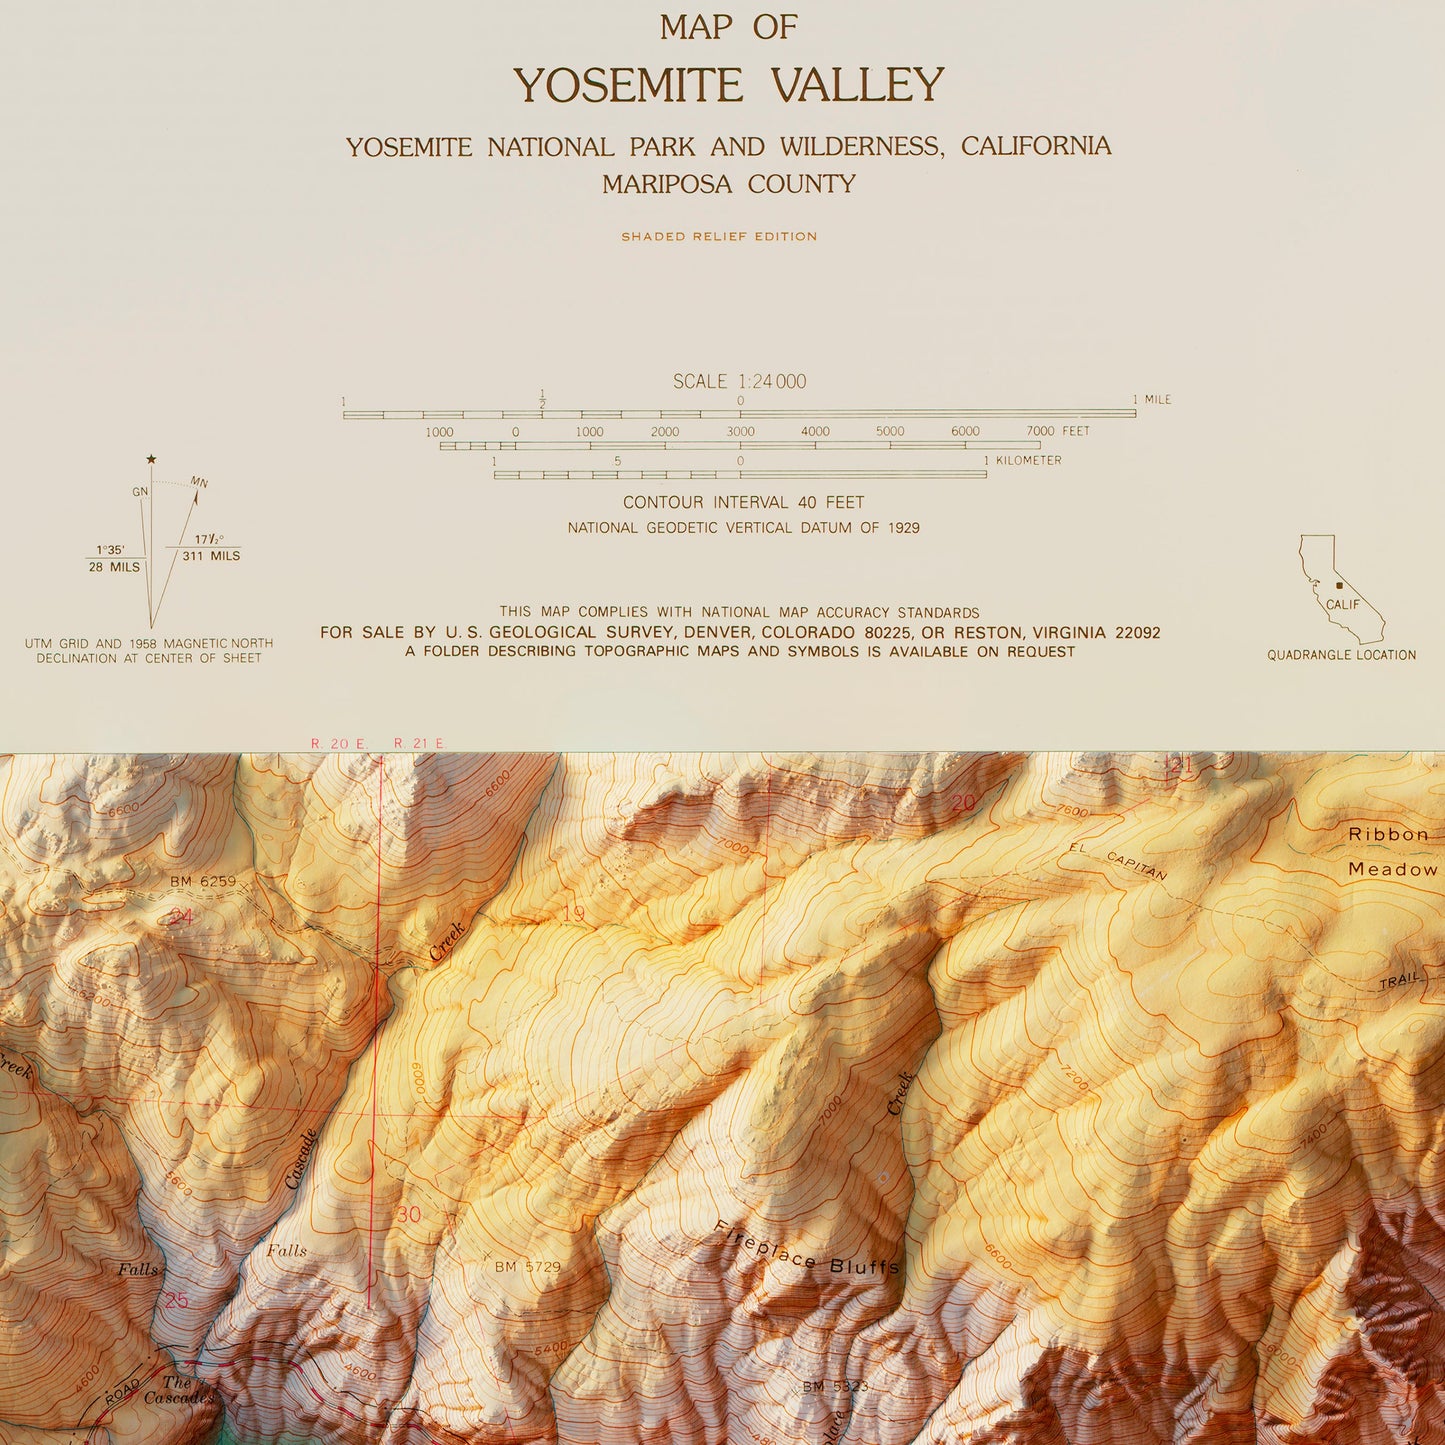 Yosemite Valley 1970 Shaded Relief Map